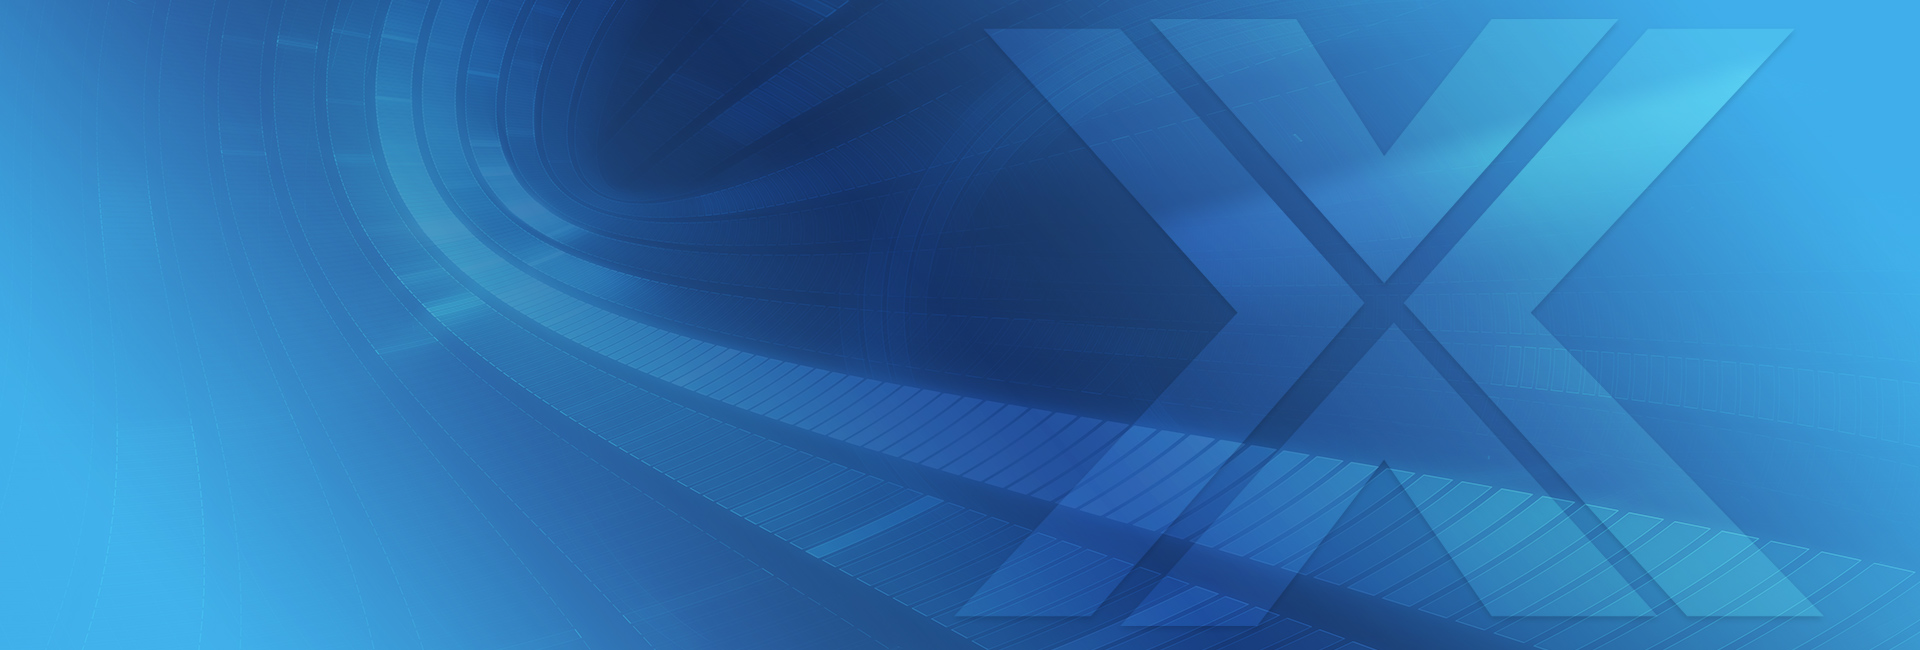 A blue abstract background with the letter x.